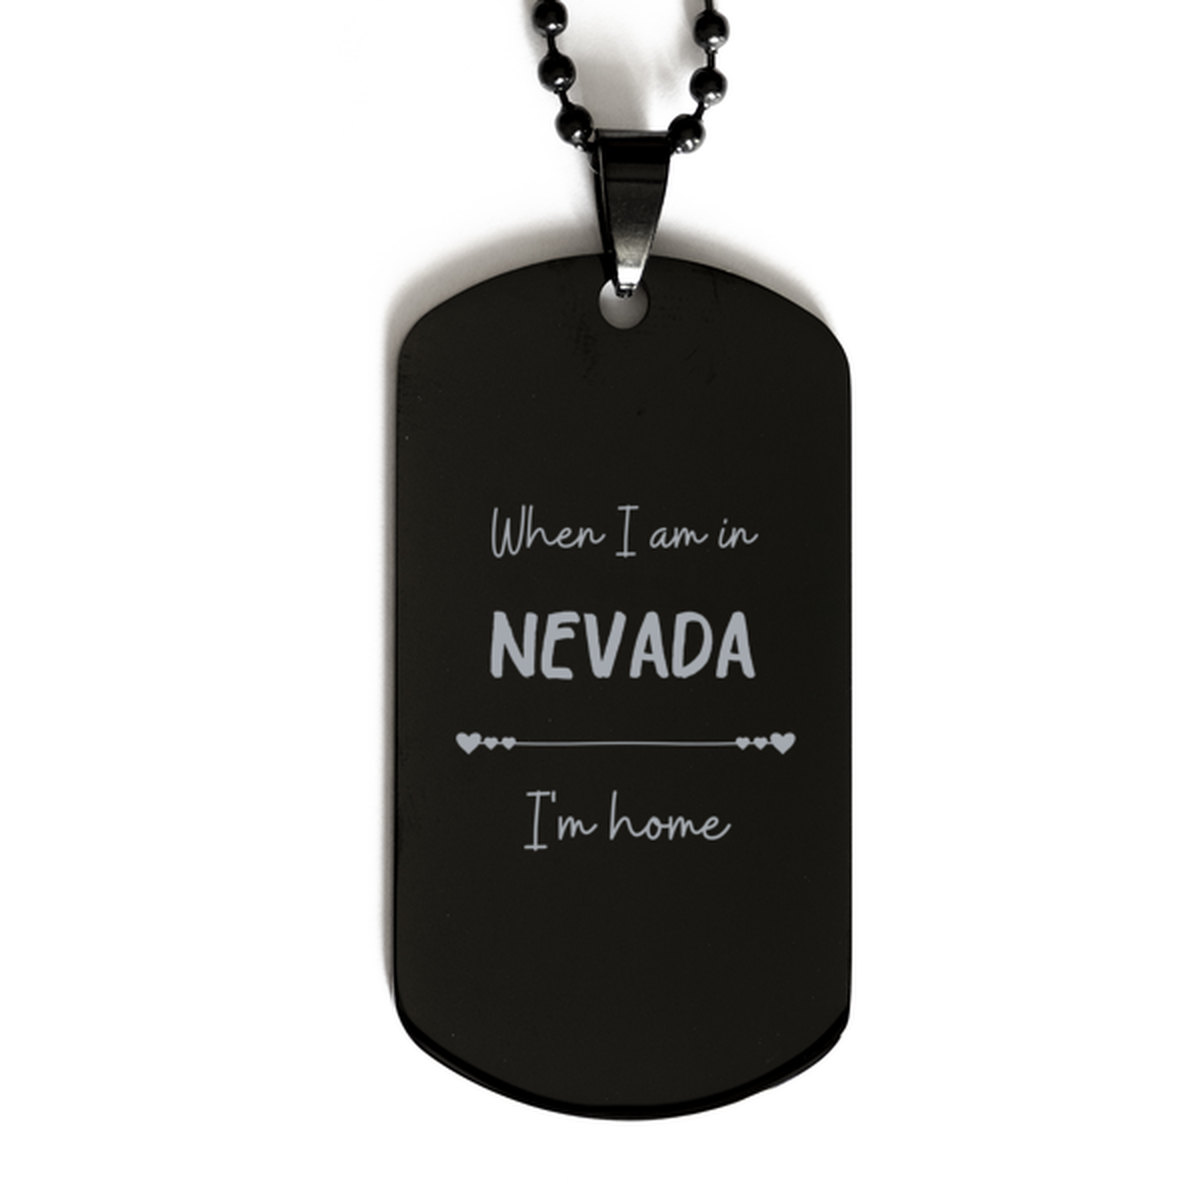 When I am in Nevada I'm home Black Dog Tag, Cheap Gifts For Nevada, State Nevada Birthday Gifts for Friends Coworker